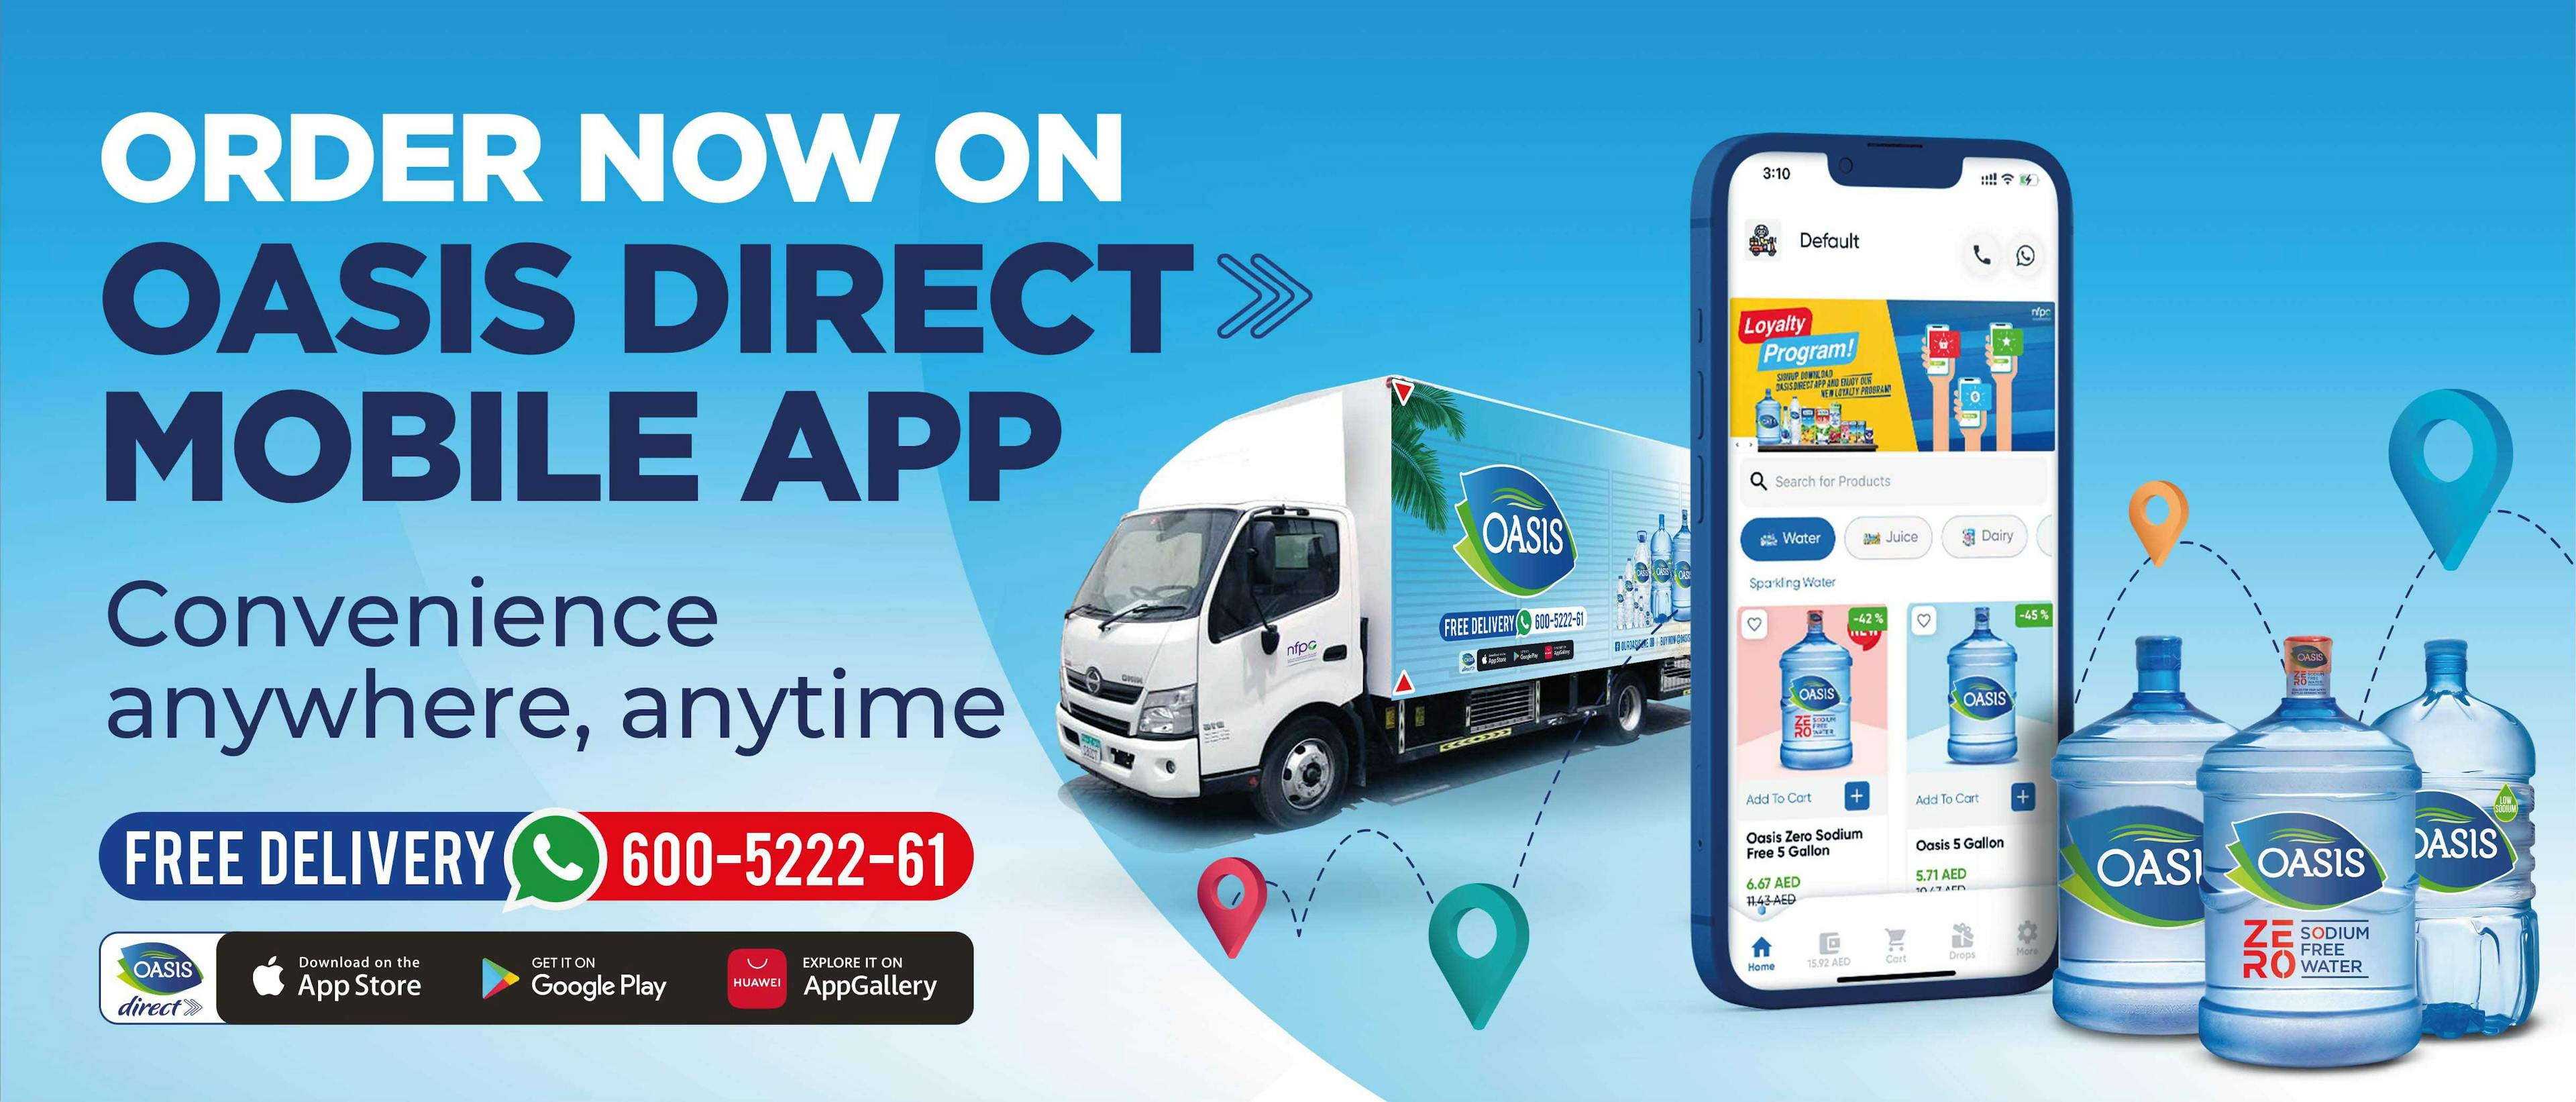 Oasis Direct Mobile App